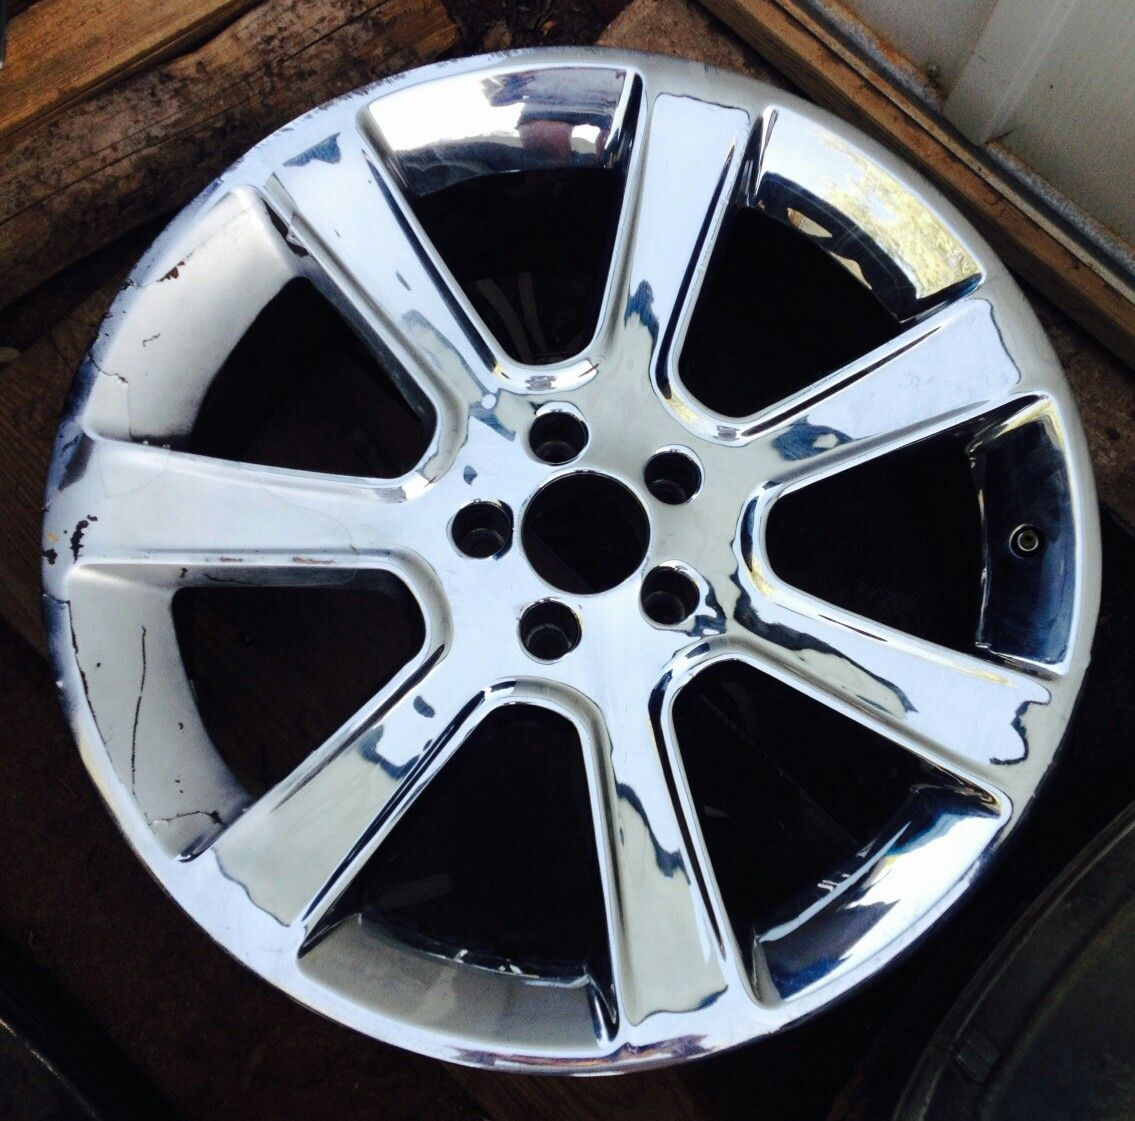 Pair of Authentic 20" inch Chrome Saleen Wheels with staggered tires